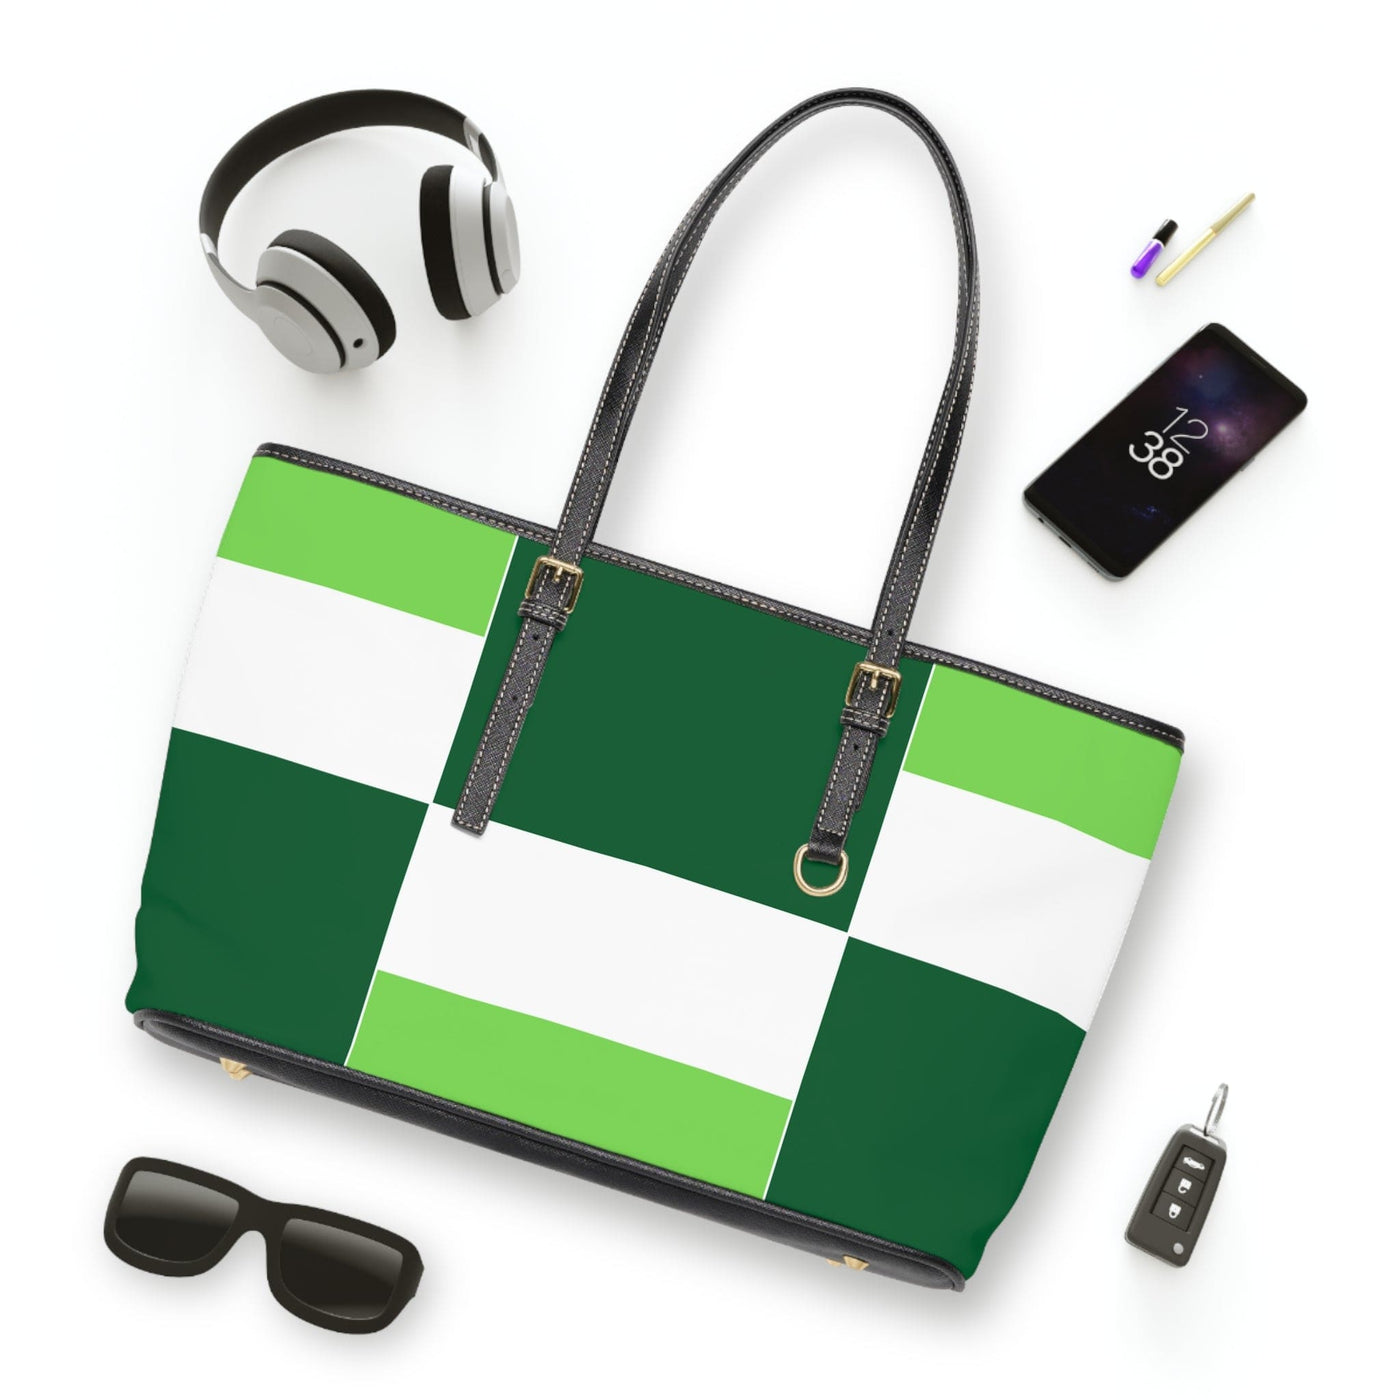 Large Leather Tote Shoulder Bag Lime Forest Irish Green Colorblock - Bags